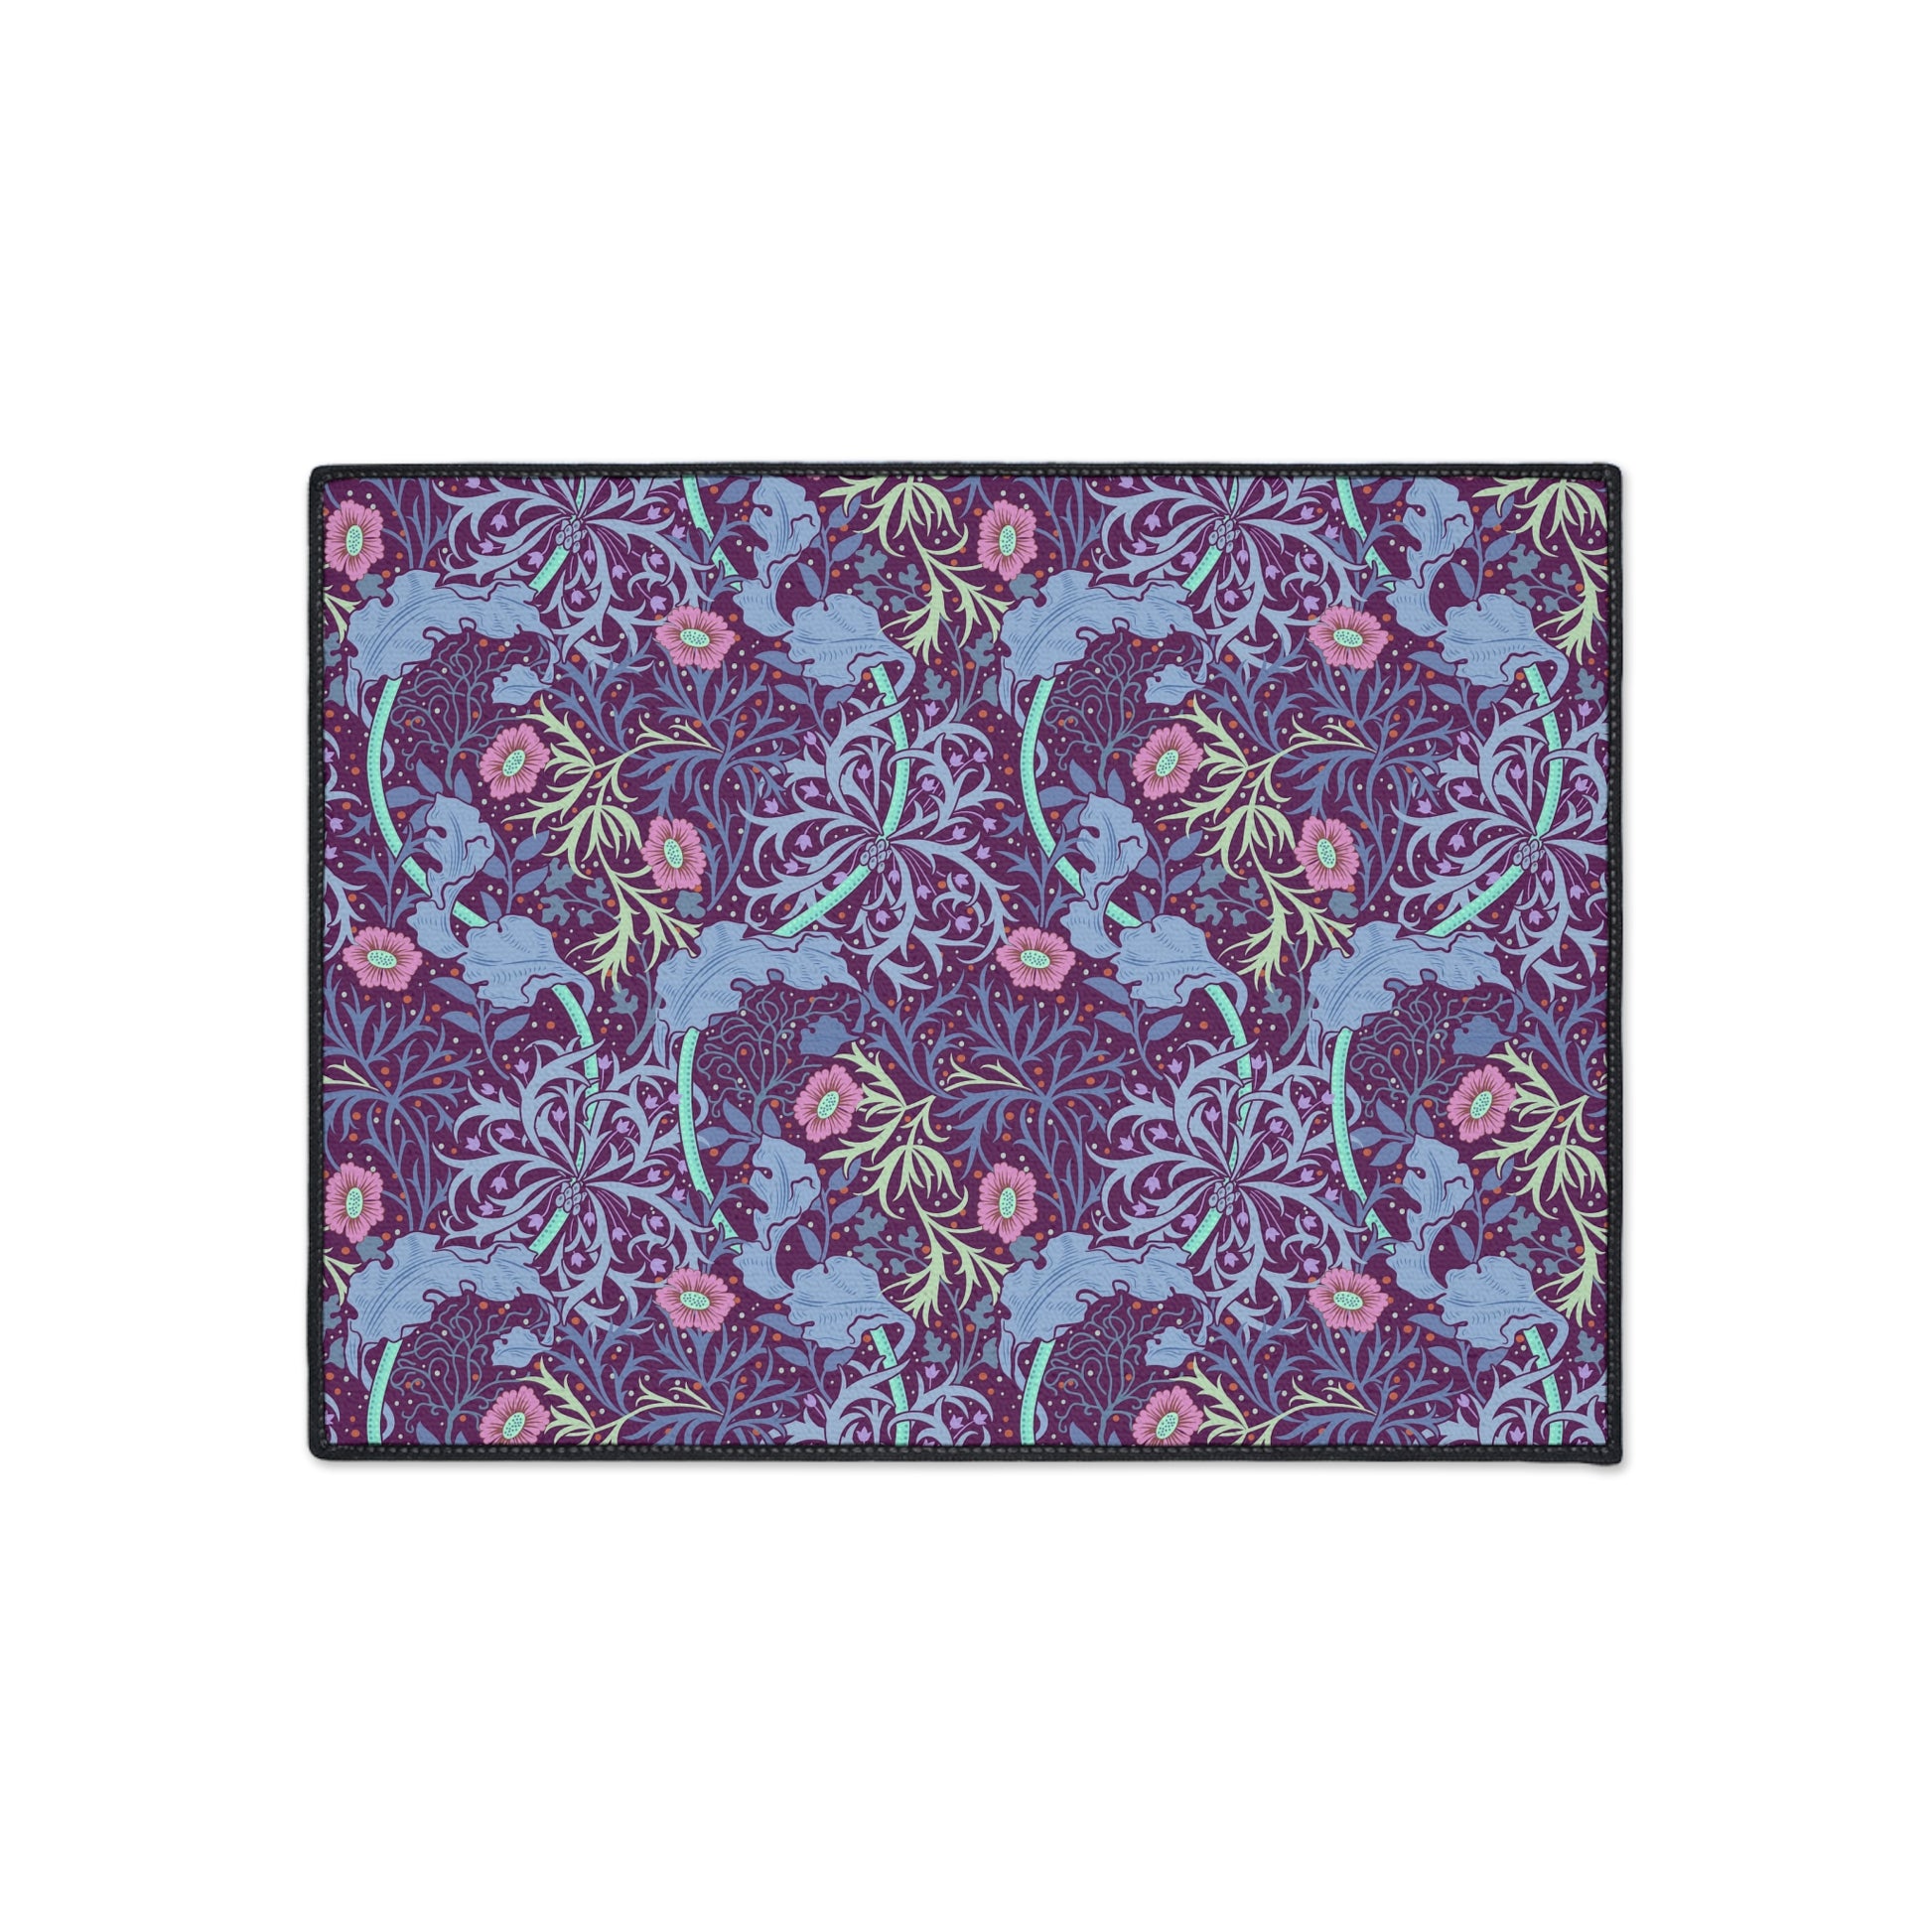 william-morris-co-heavy-duty-floor-mat-seaweed-collection-pink-flowers-5